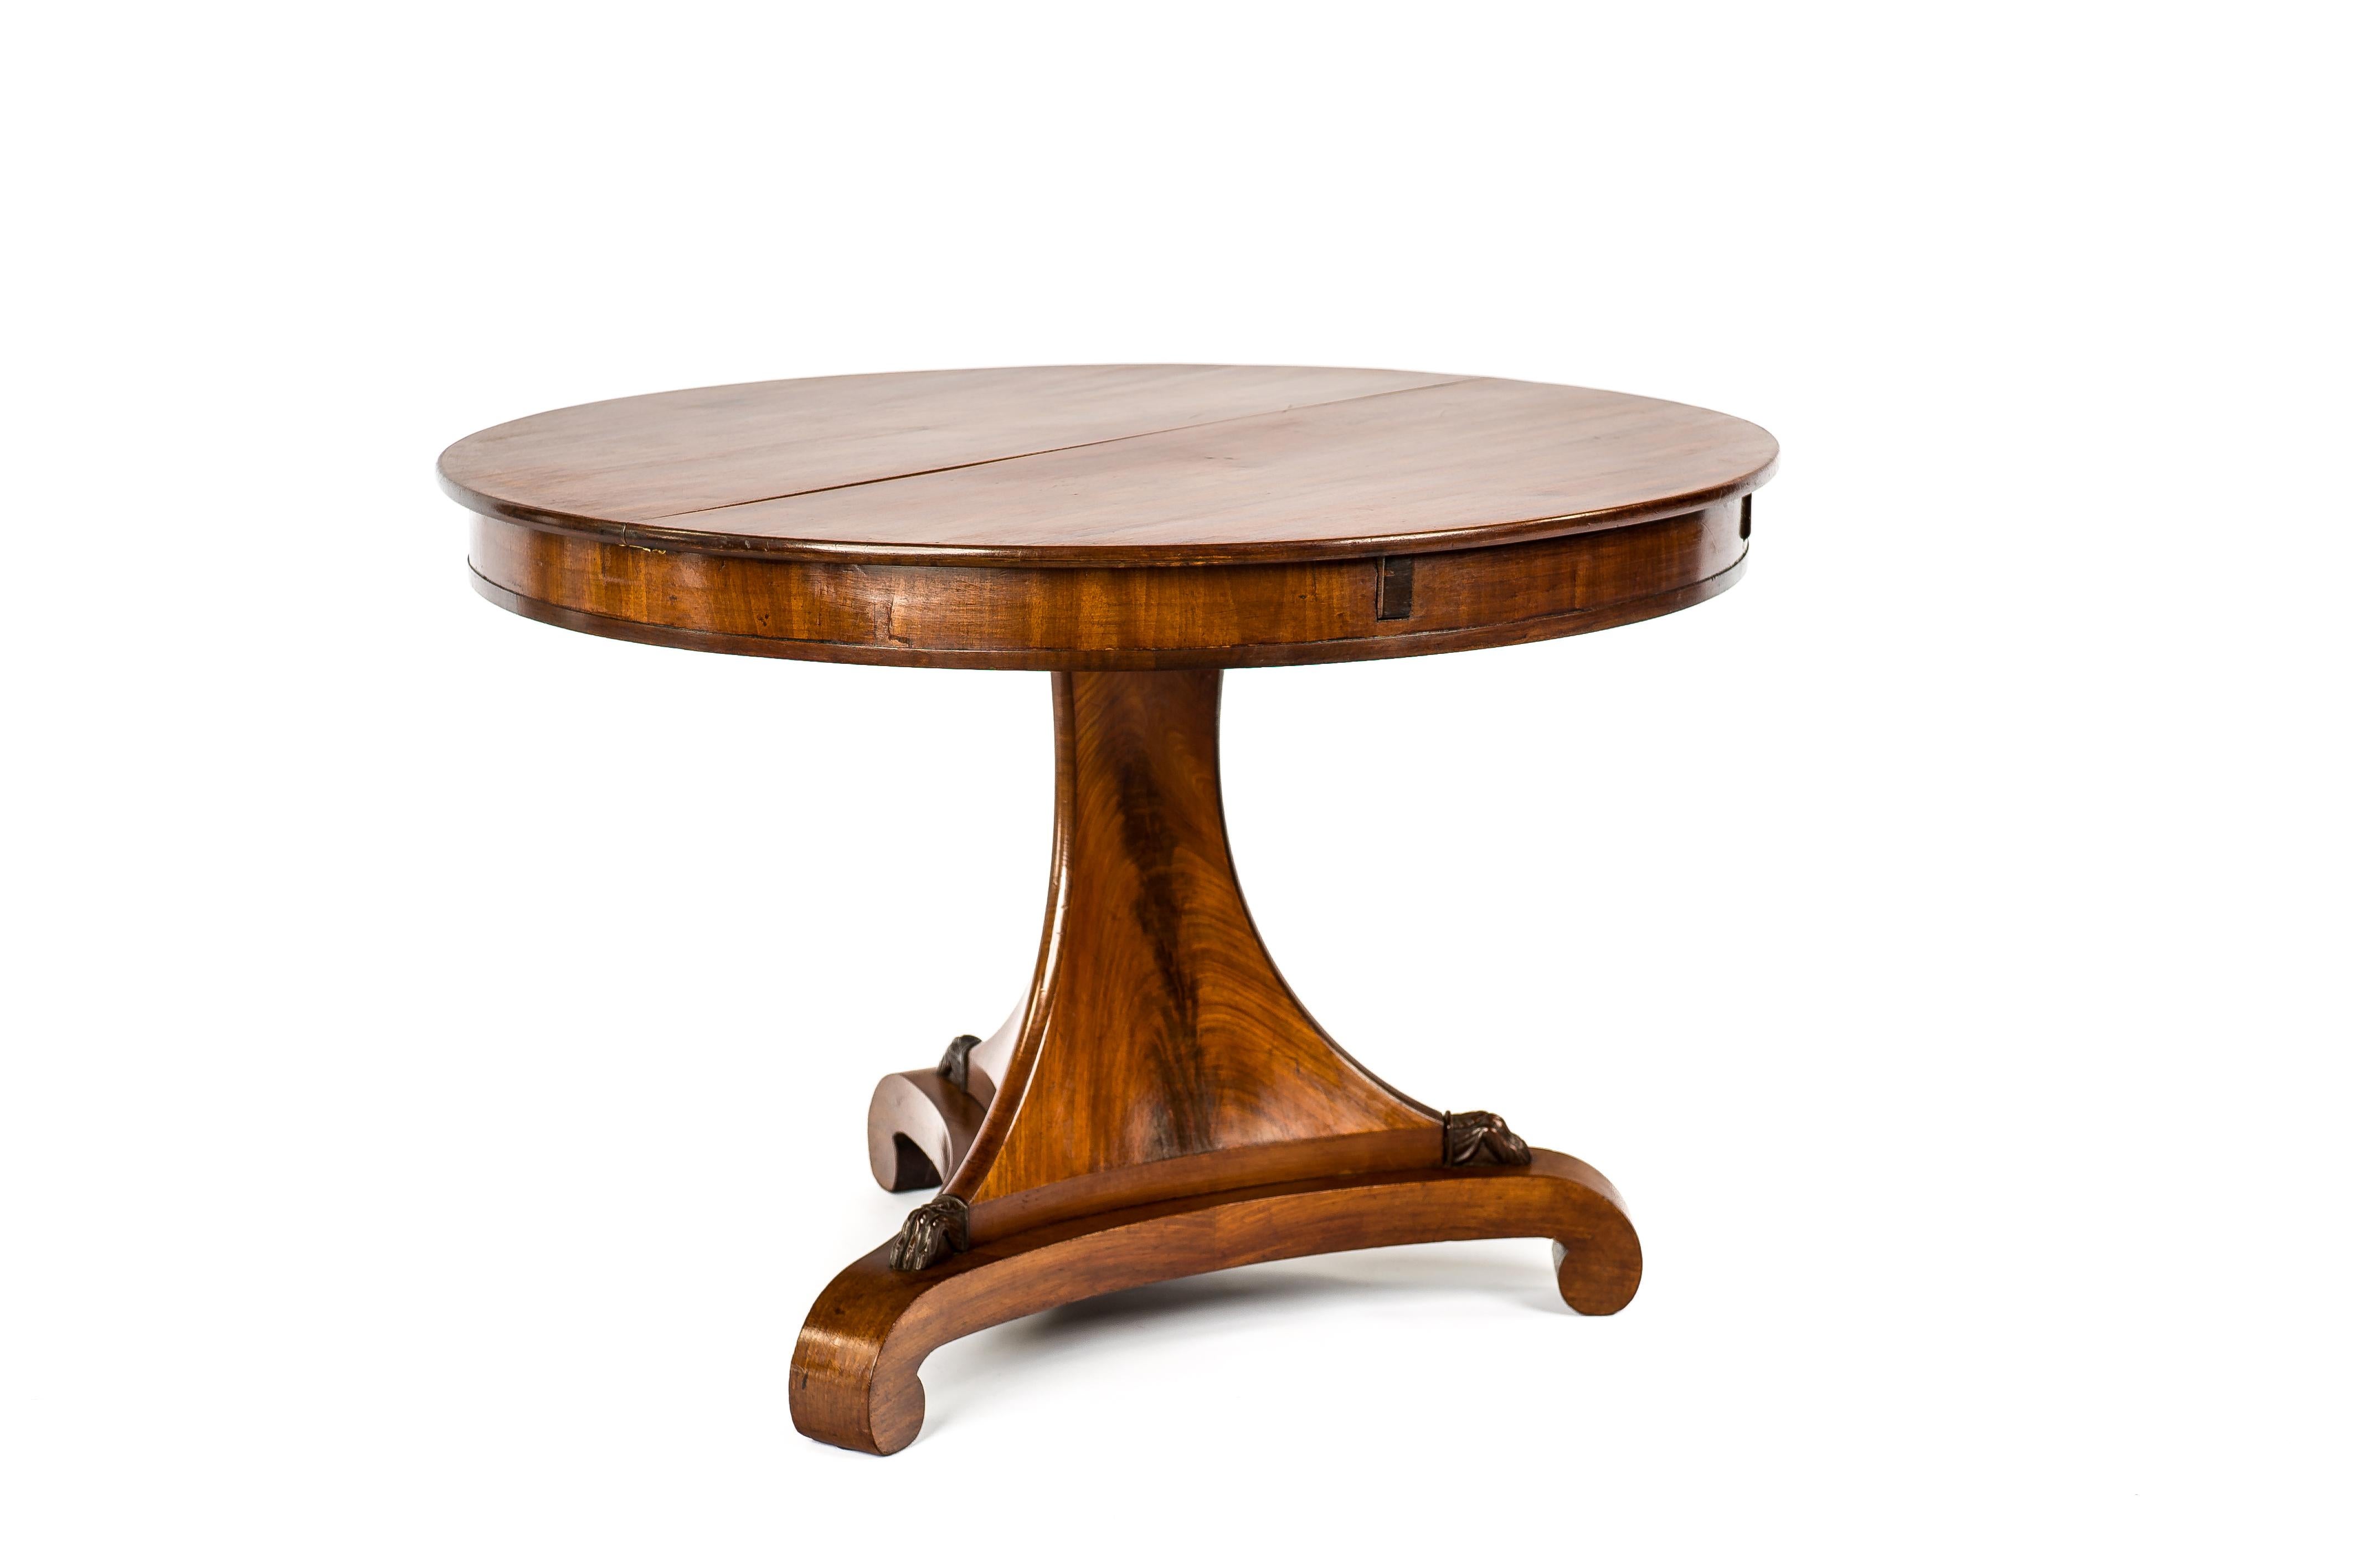 A classic Dutch Empire extension table in beautiful flamed mahogany. The tabletop is made from two sheets of mahogany in a symmetrical open book manner. The table has a solid mahogany top of 0,70 inches. Below is a mahogany veneered apron of 3.15